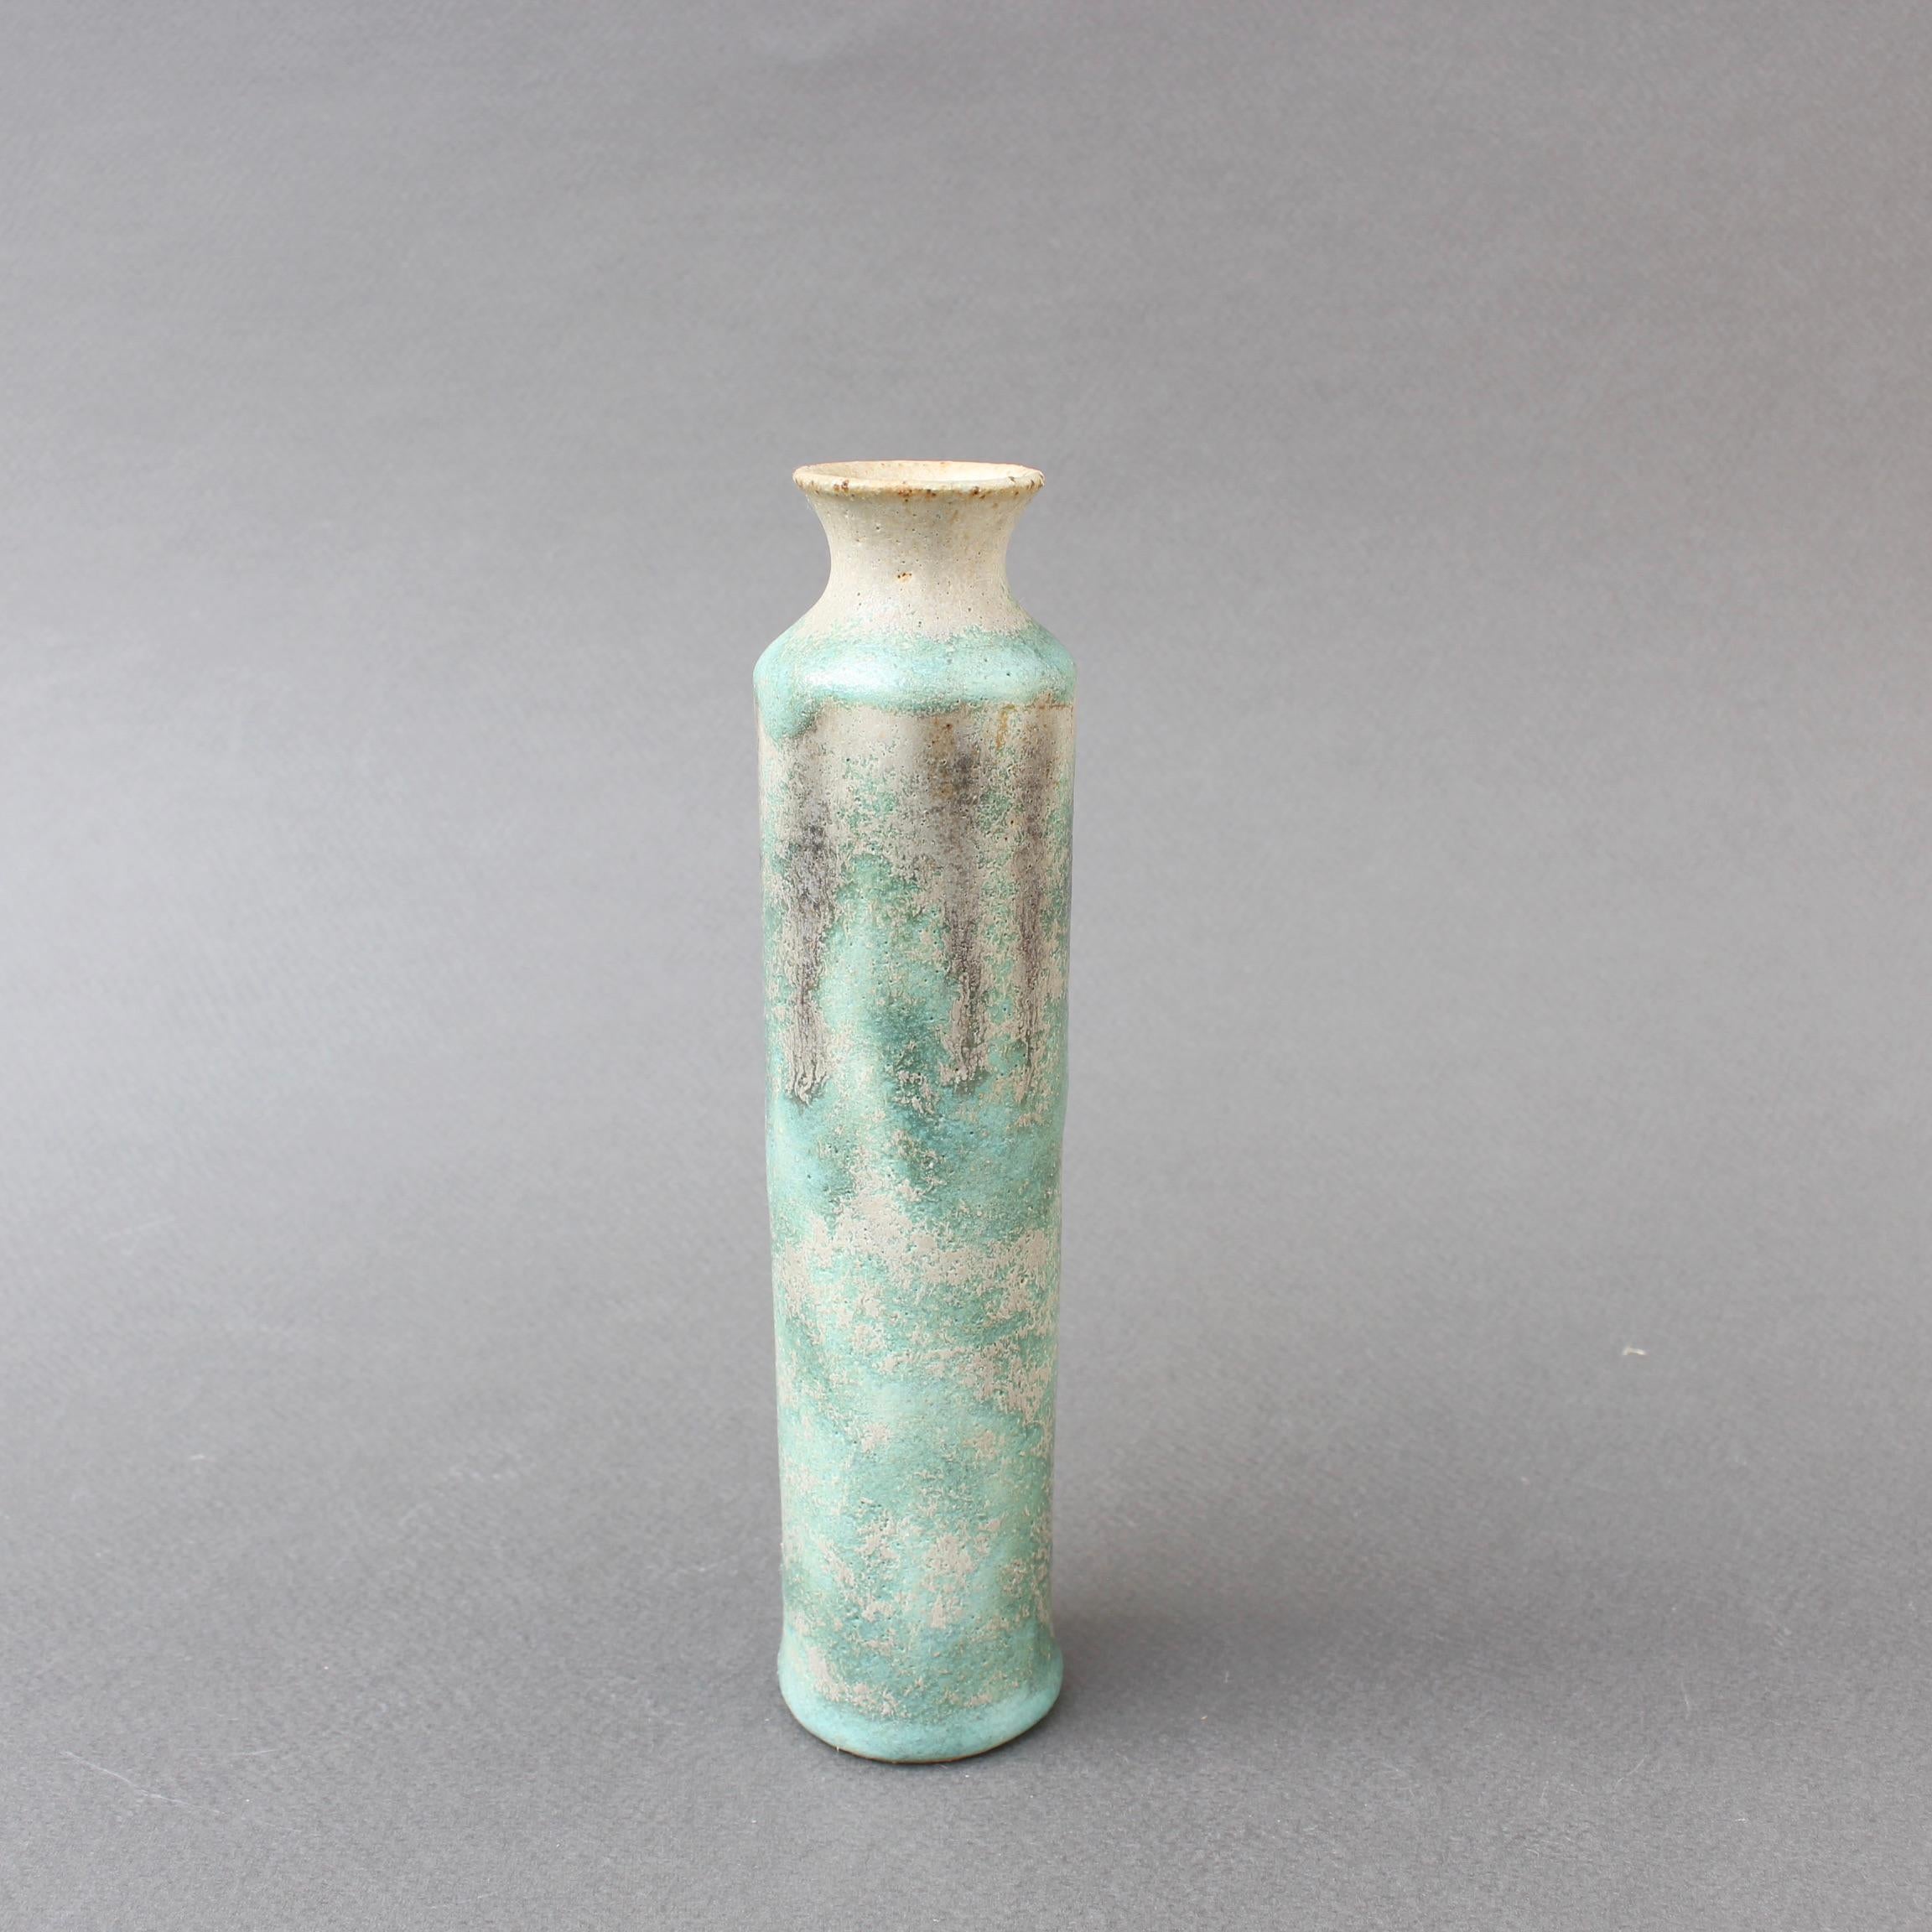 Diminutive midcentury Italian ceramic bottle by Bruno Gambone (circa 1970s). Elegantly cylindrical with a misty, rustic, matt glaze in an aqua green, patches of beige and several dark stripes evincing dripping spray paint rather than a more